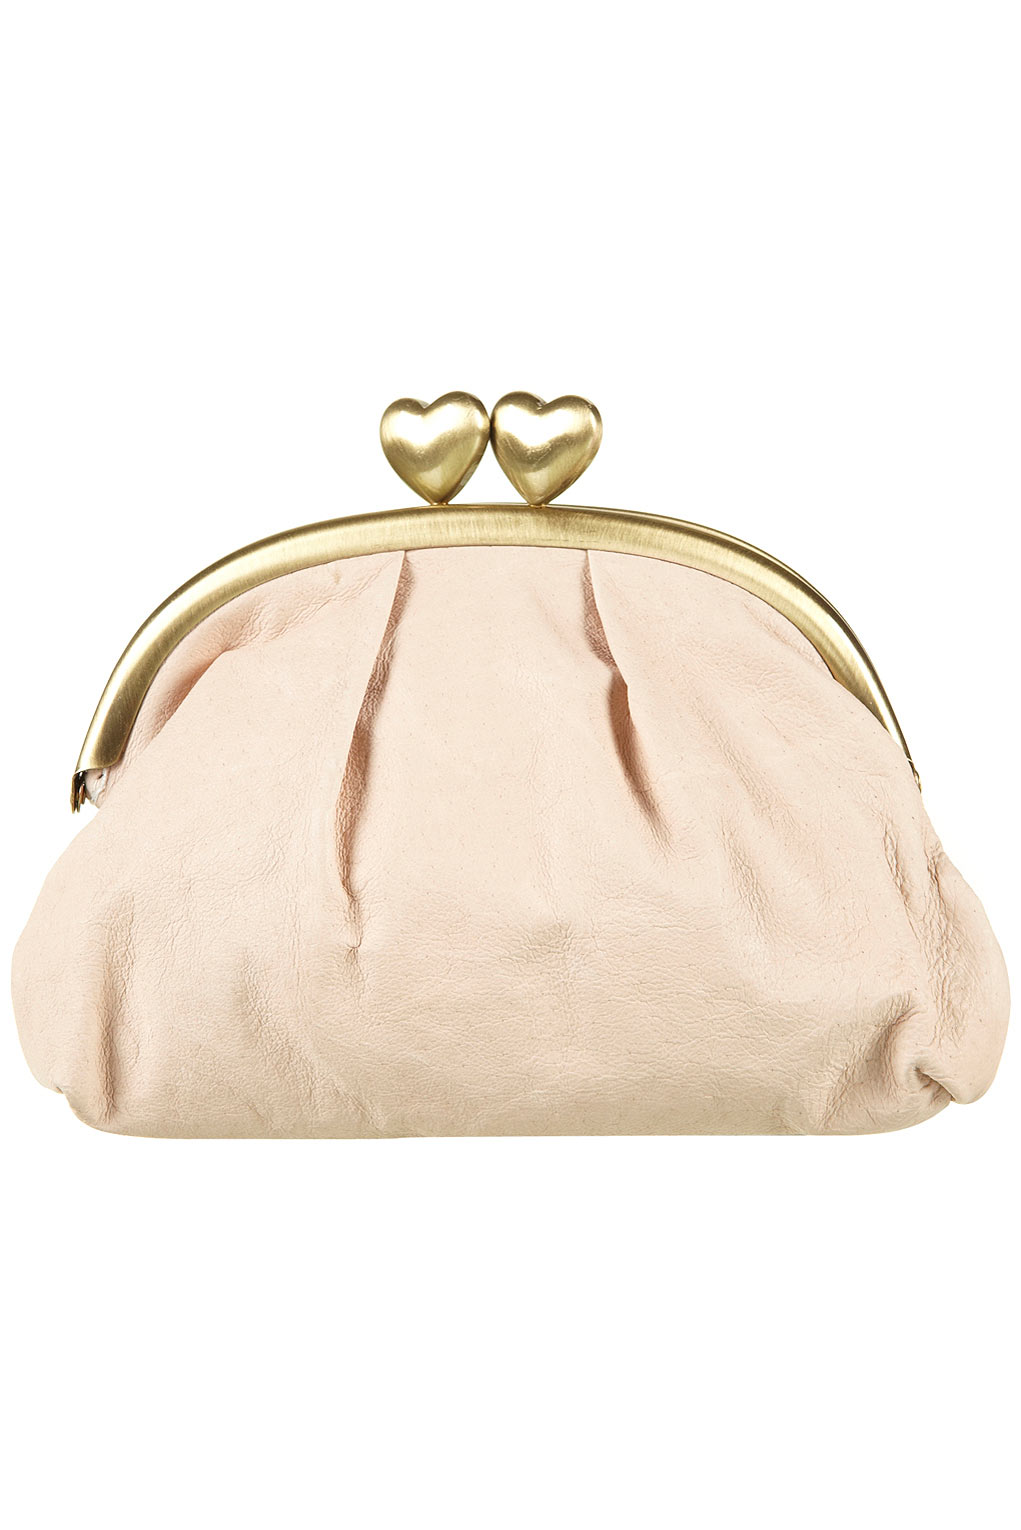 TOPSHOP Leather Heart Clasp Purse in Antique Gold (Pink) - Lyst